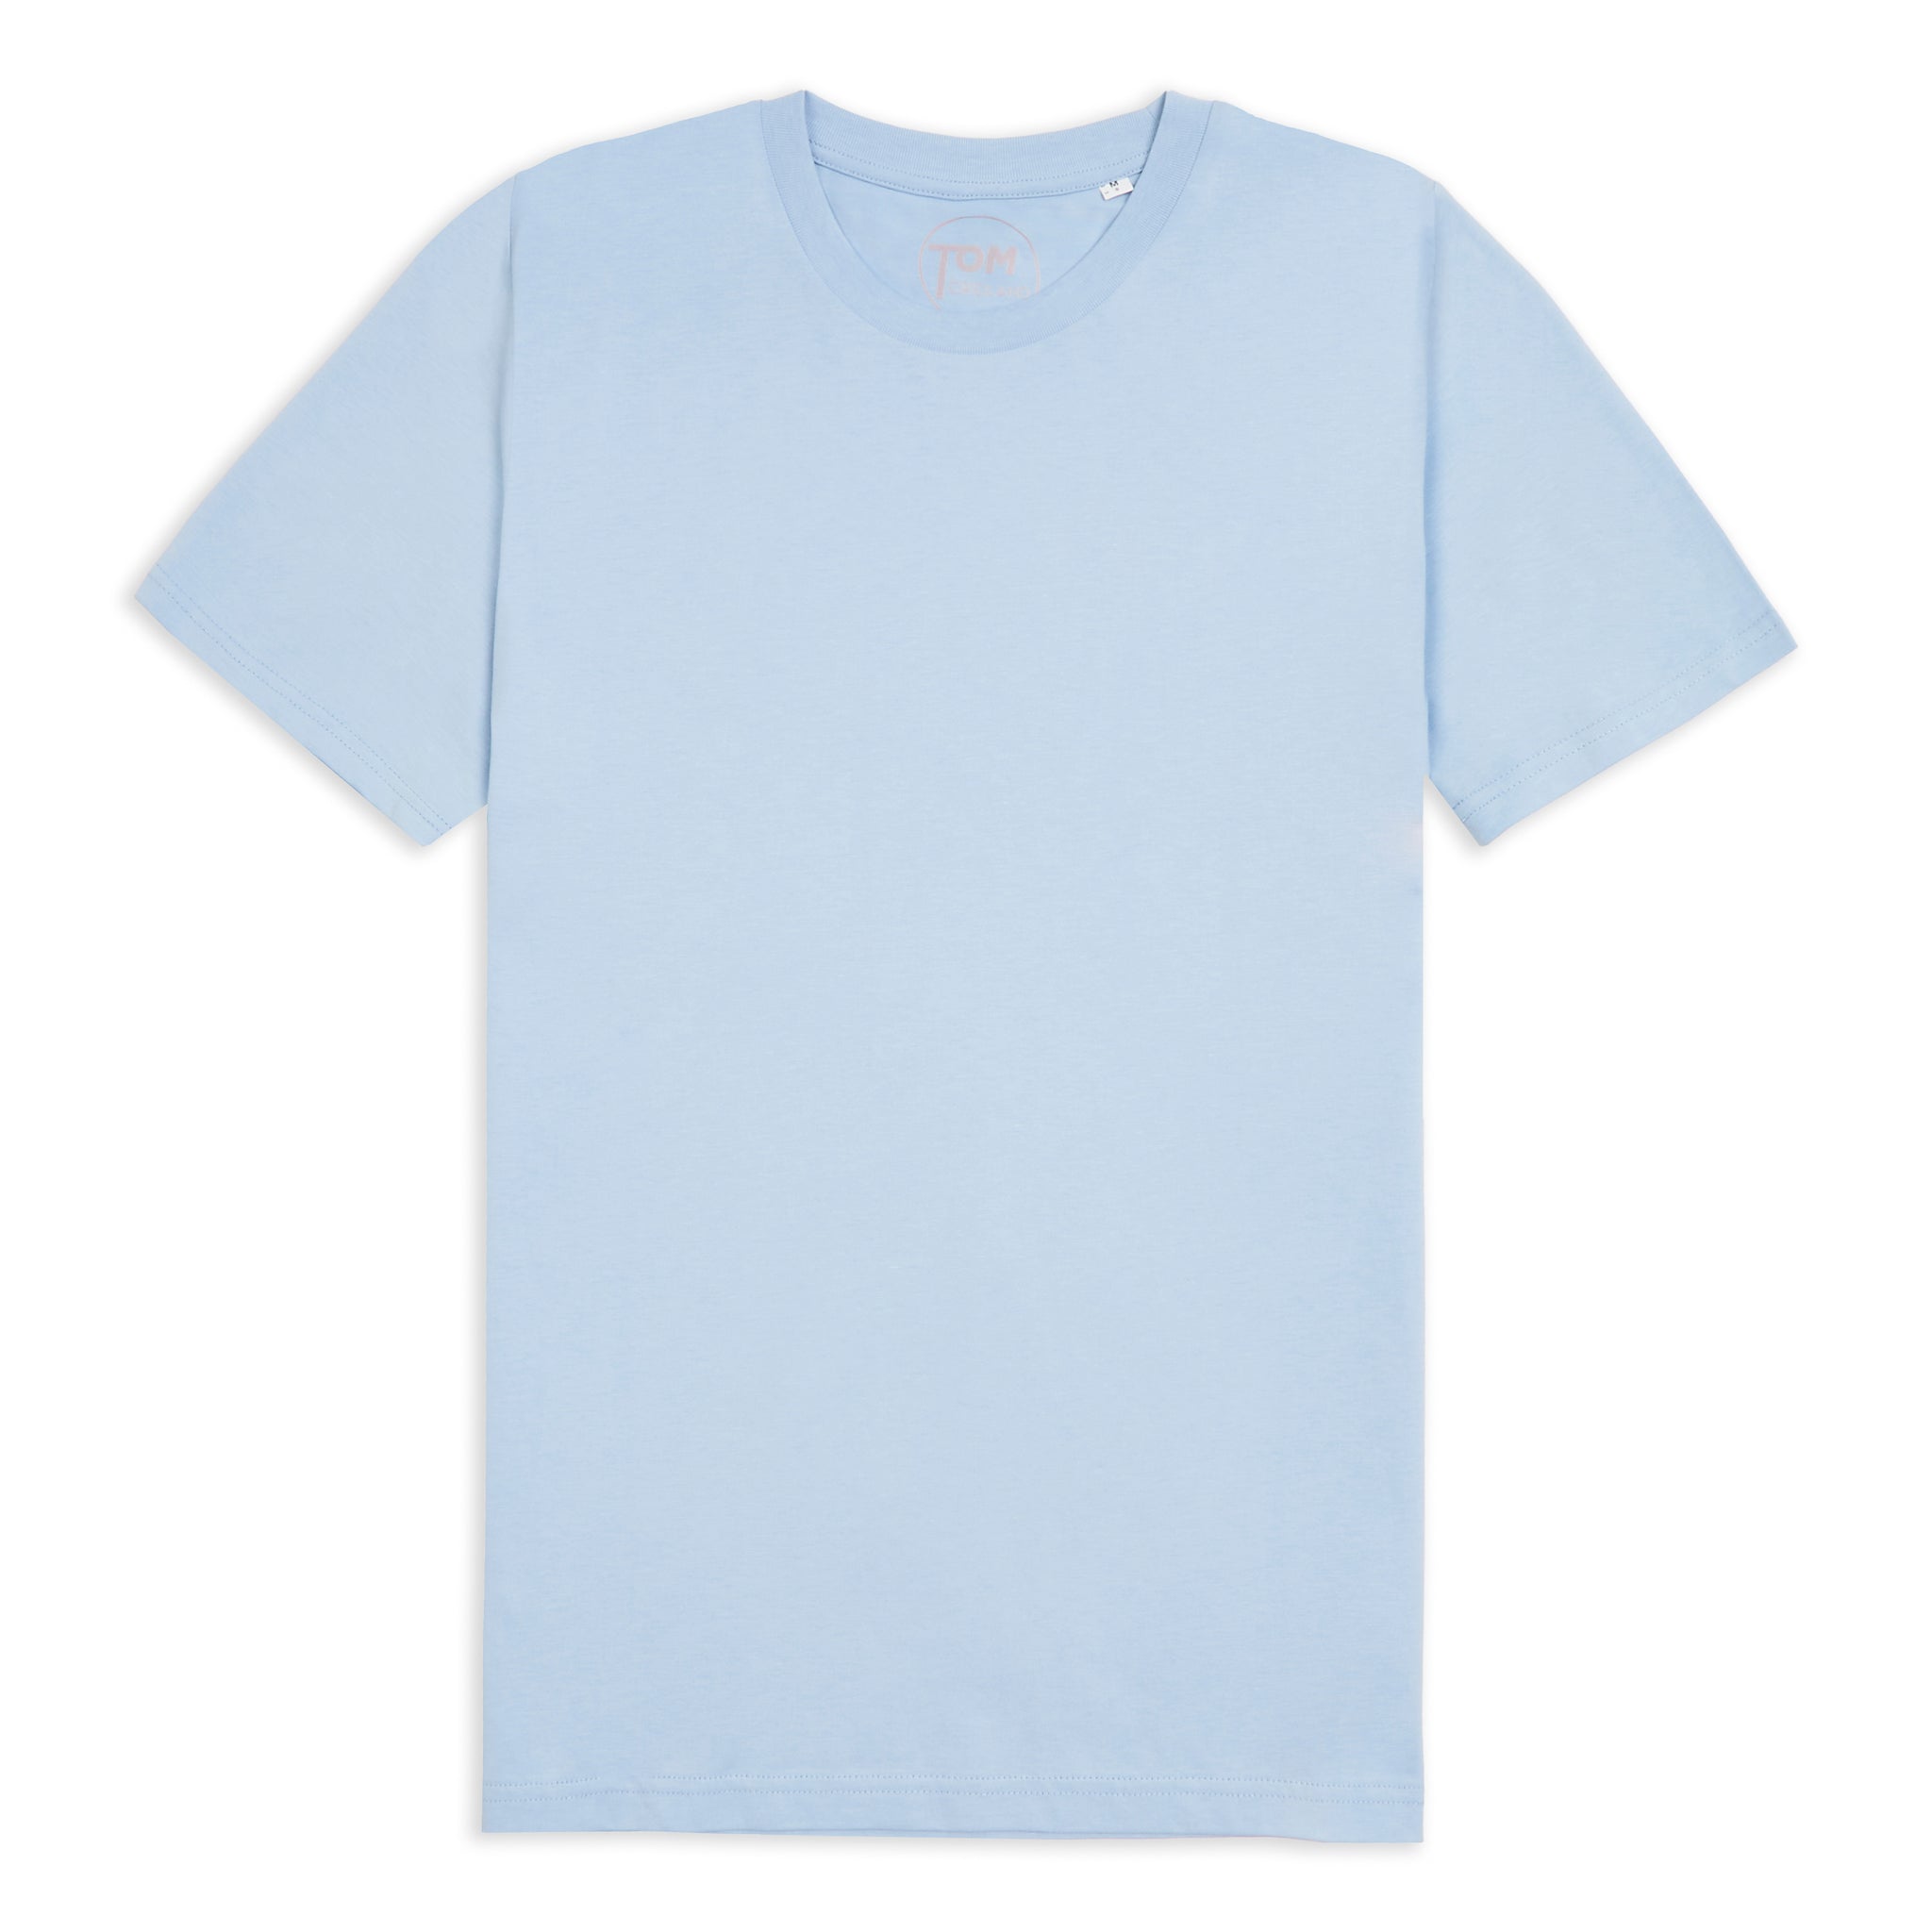 Baby Blue 30 Year T-Shirt | Sustainable fashion by Tom Cridland